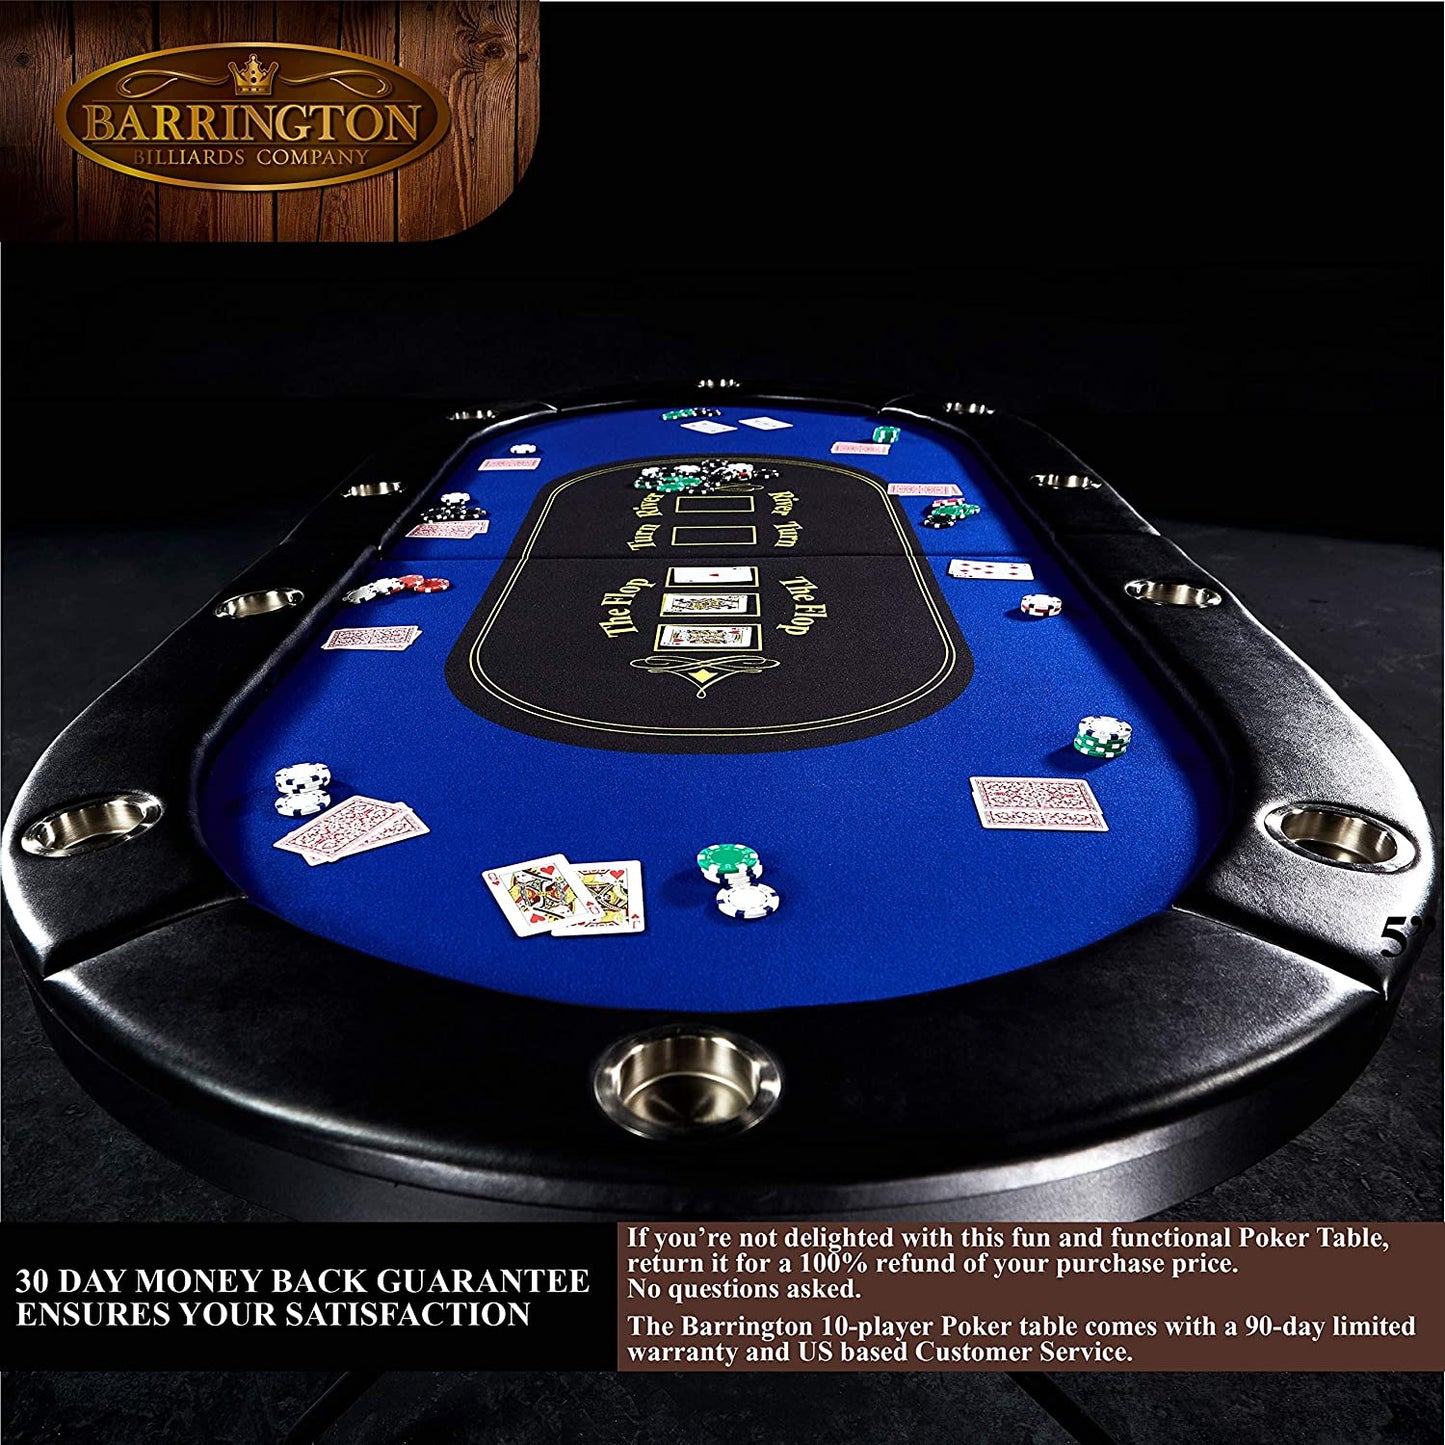 A stylish and large 10 player poker table which has blue casino style felt. There are playing cards and chips on the table. The text says, '30 days money back guarantee.'